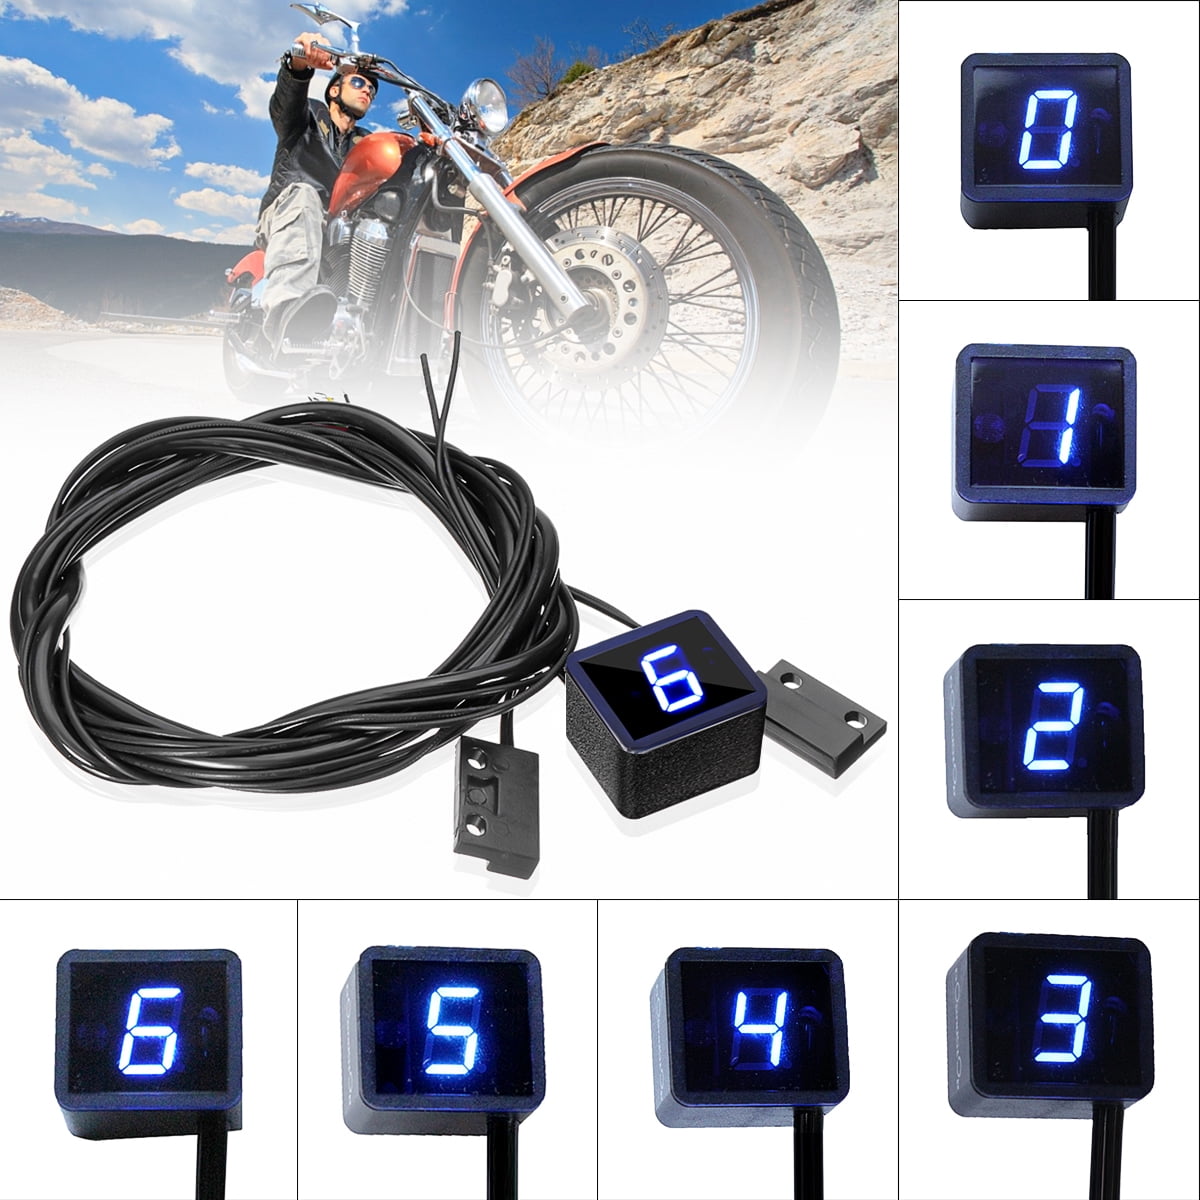 Motorcycle Gear Indicator Gear Indicator Display 6 Shift Lever Motorbikes for Shift Lever